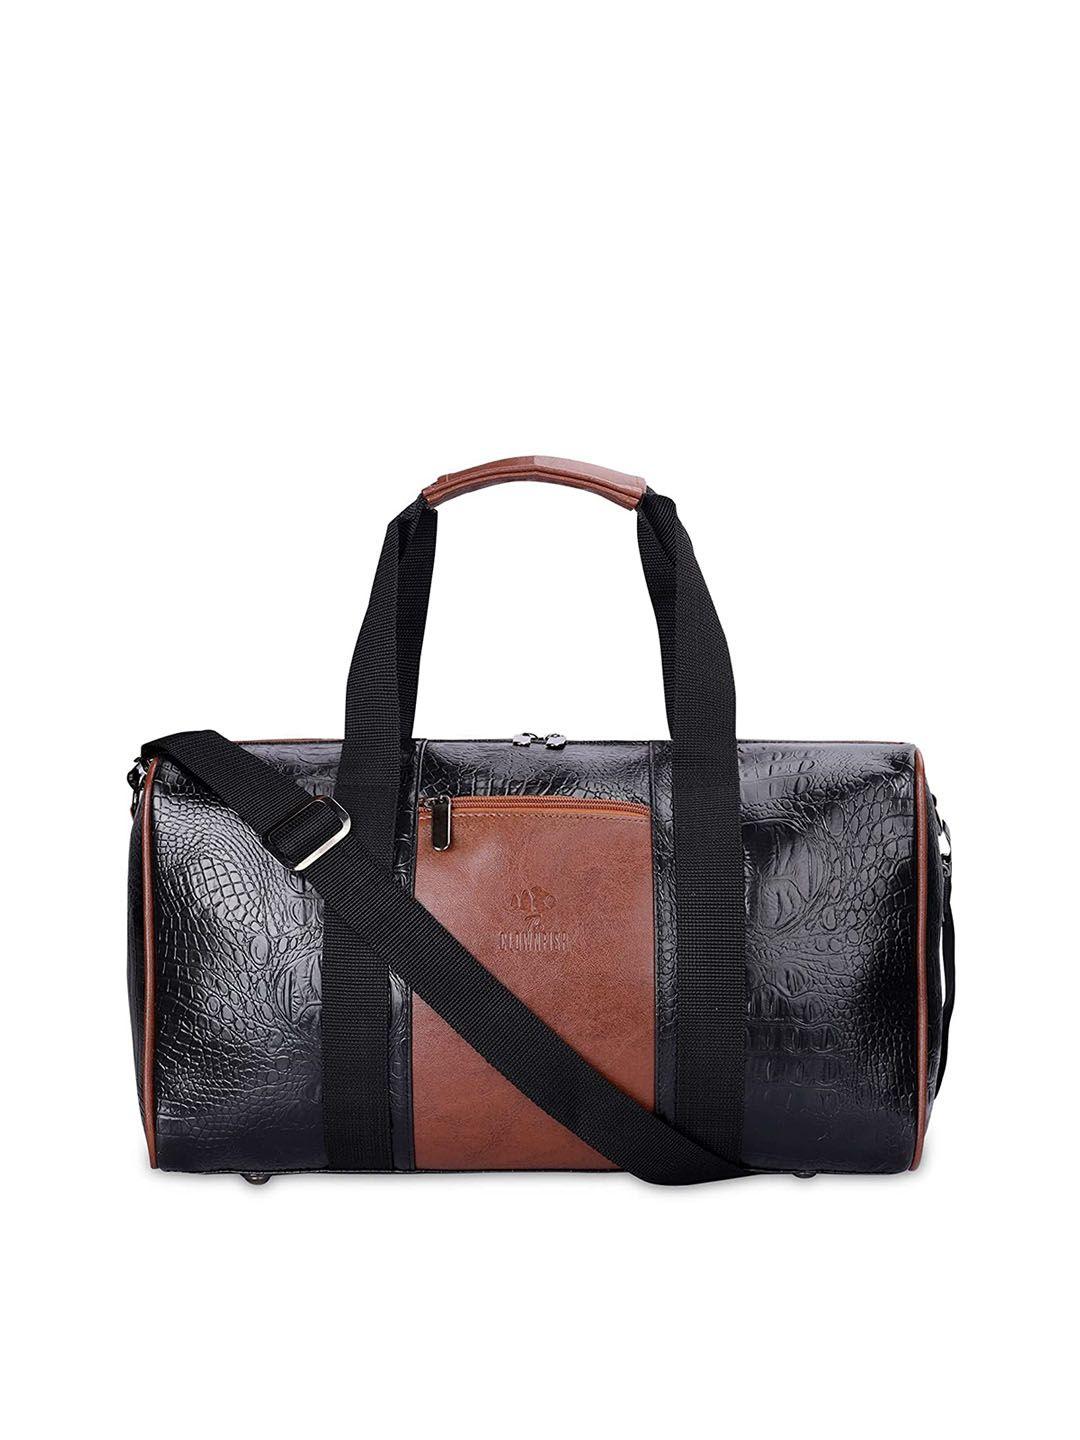 the clownfish textured leather duffel bag